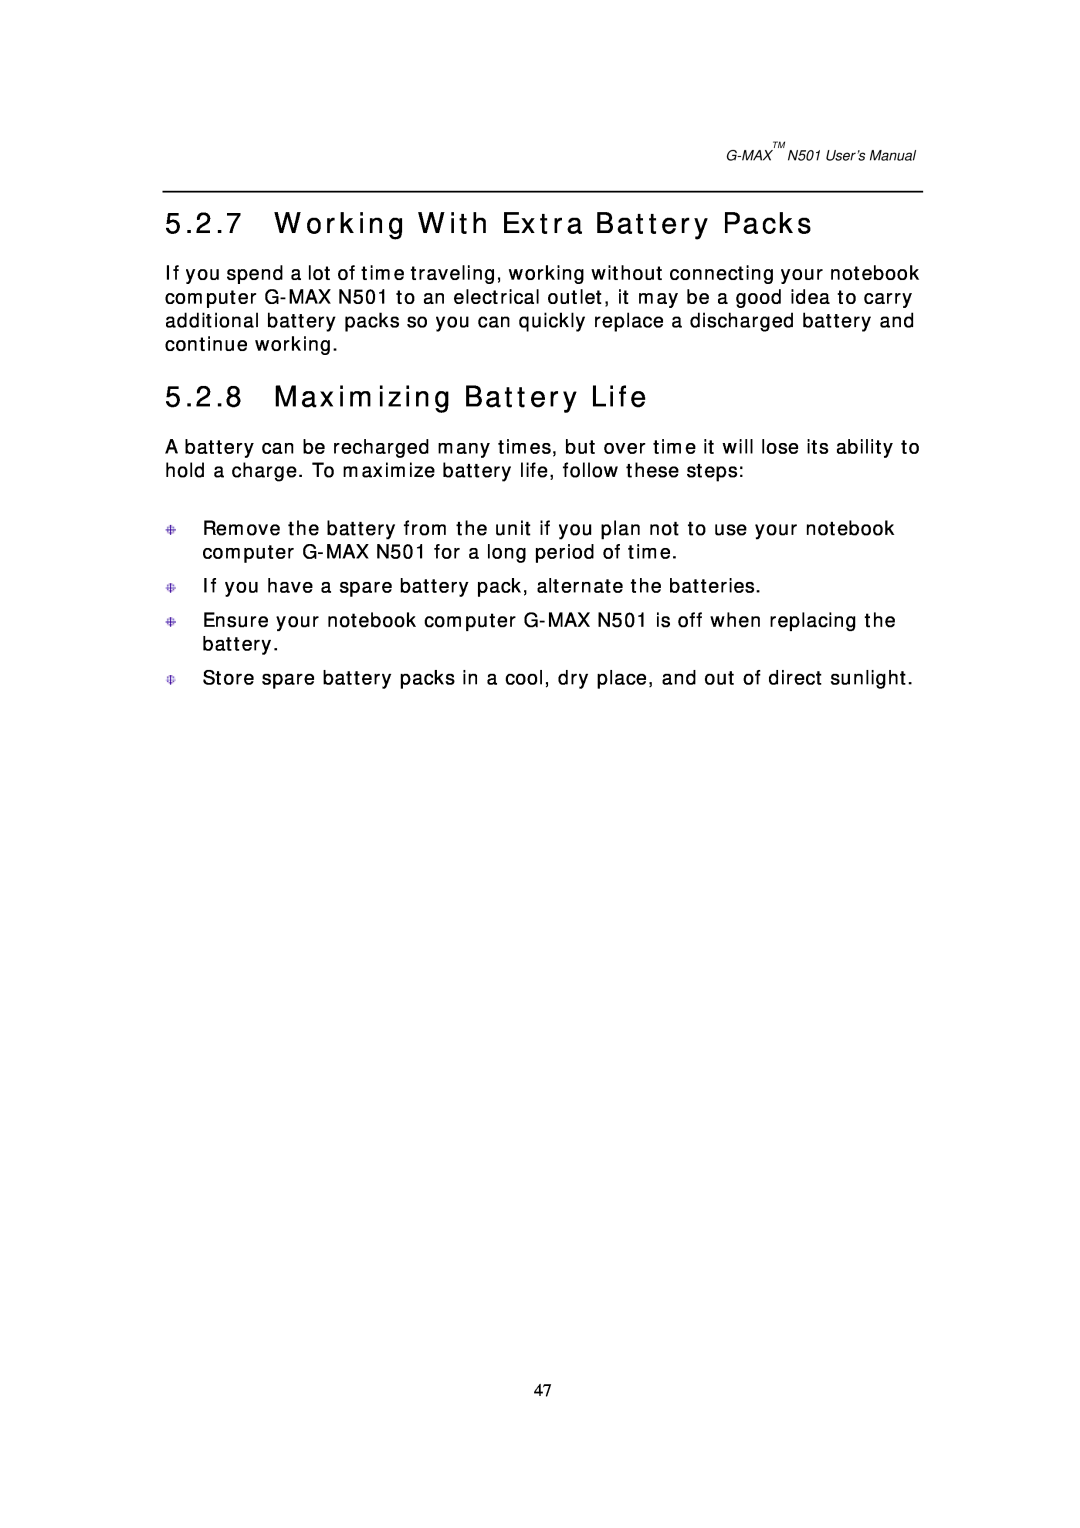 Gigabyte G-MAX N501 user manual Working With Extra Battery Packs, Maximizing Battery Life 